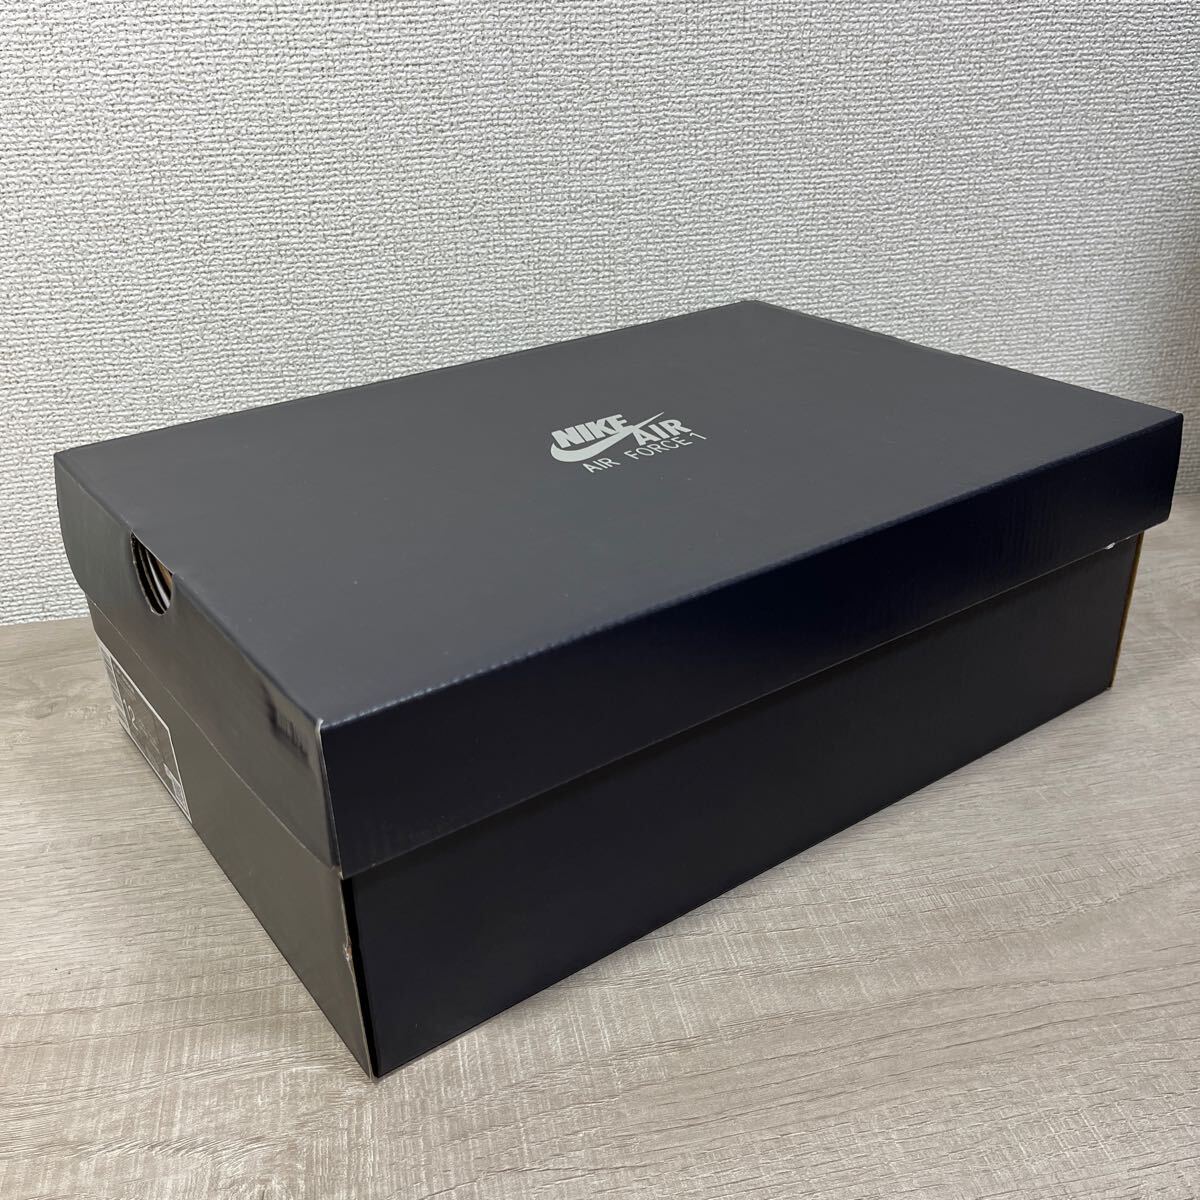 1 jpy start outright sales new goods unused NIKE Nike AF1 SHADOW Air Force 1 Shadow sneakers Triple black rare size 29cm box attaching 